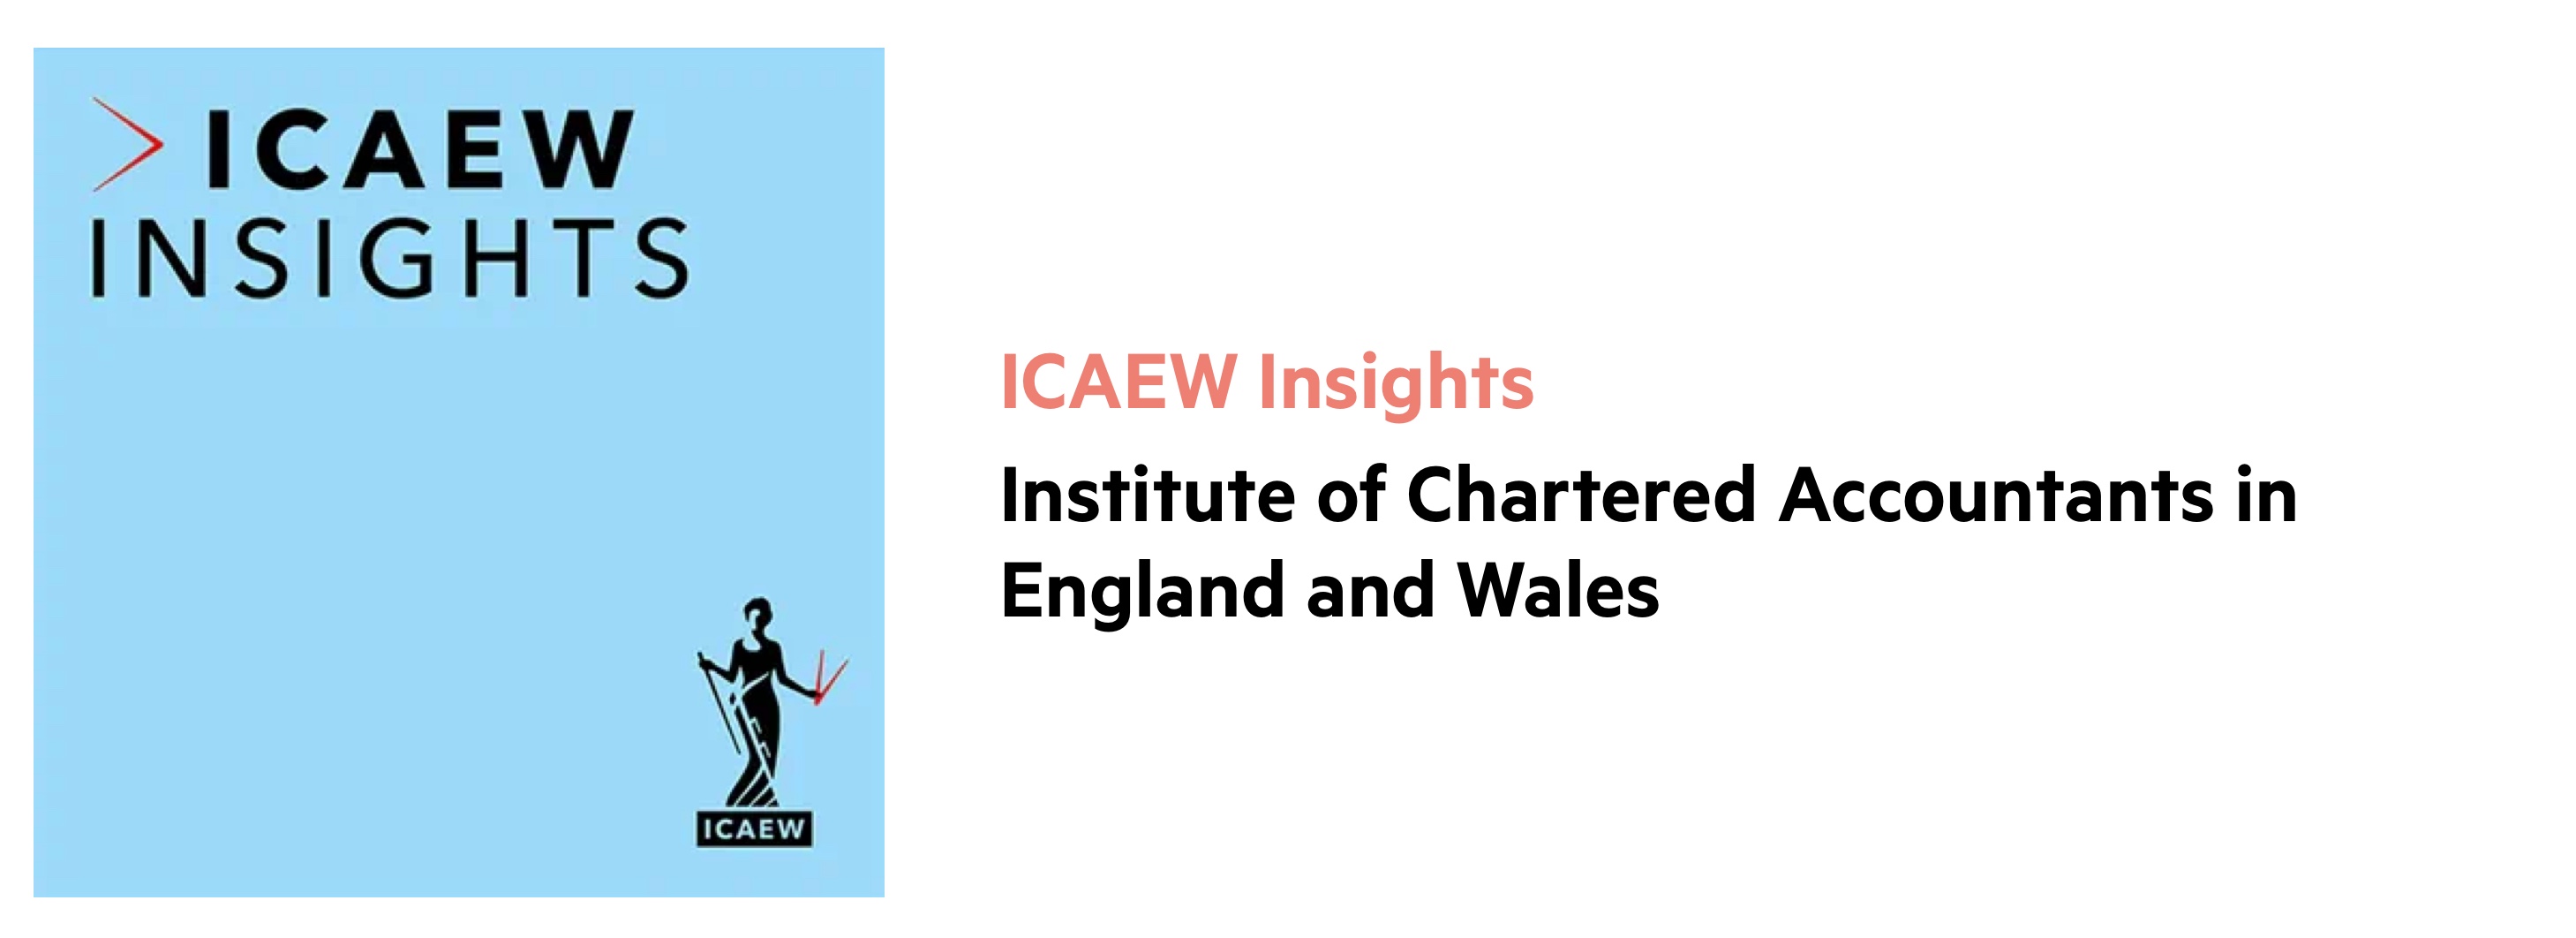 ICAEW Insights podcast cover image: Pale blue with the ICAEW logo in the bottom right corner